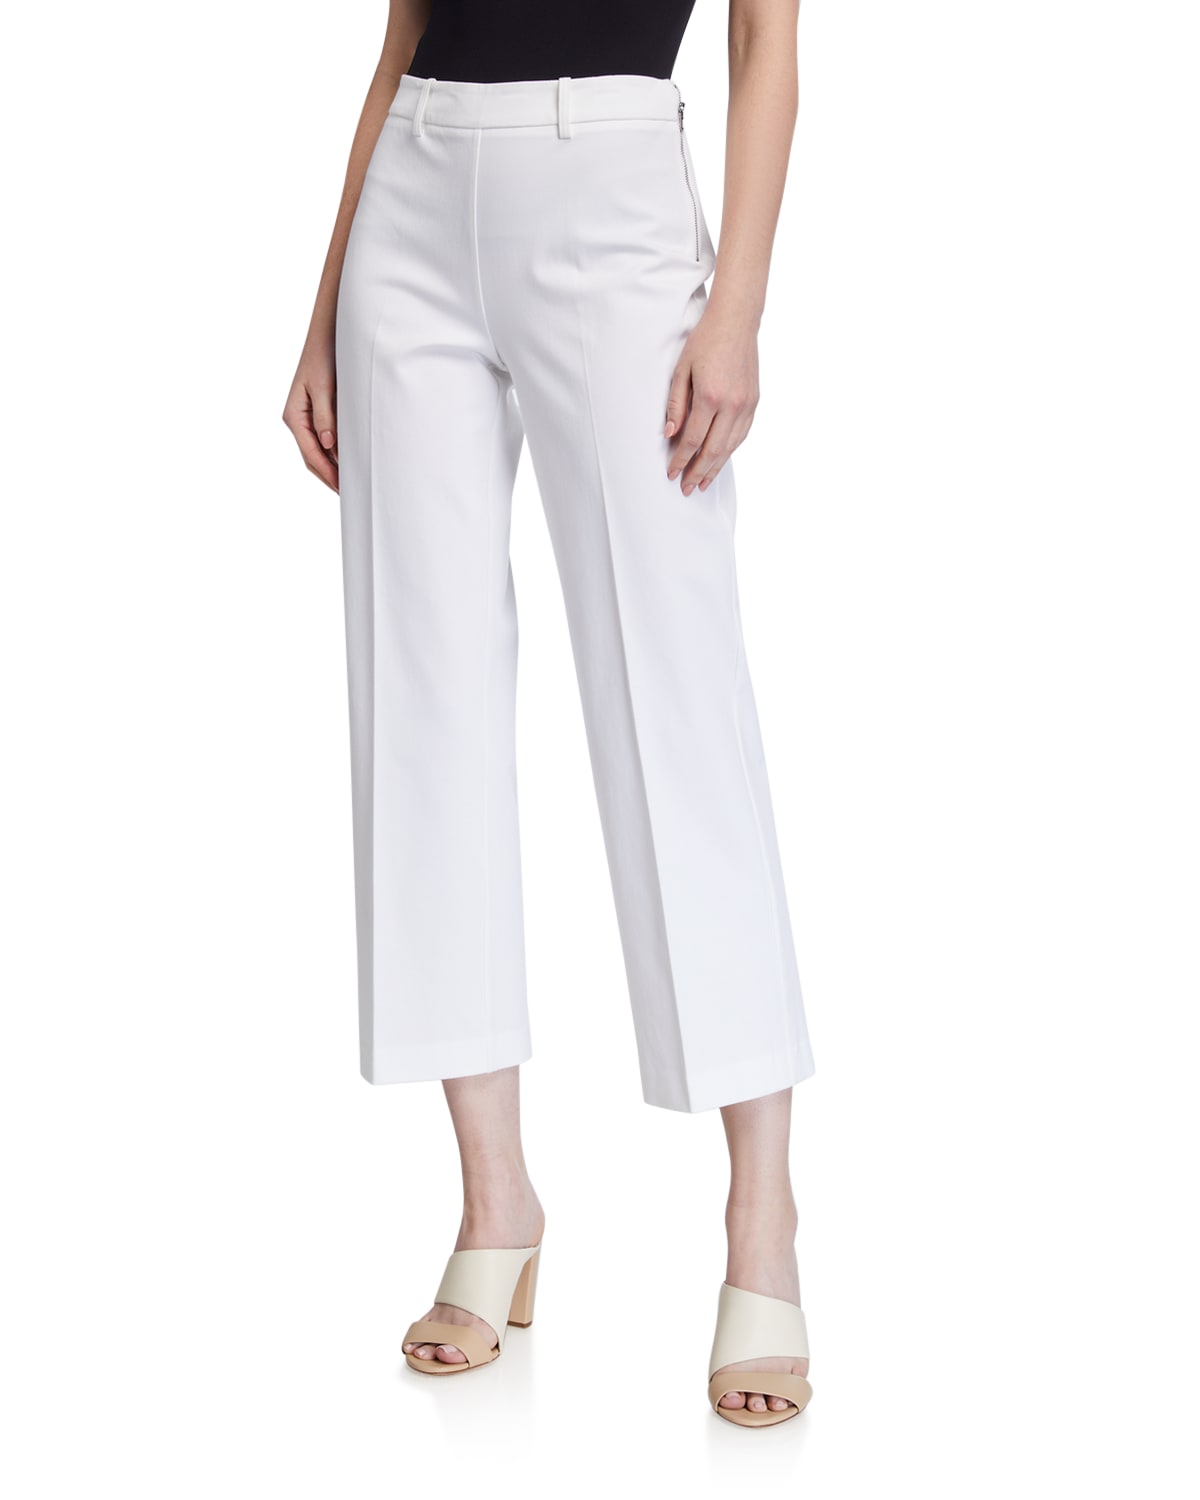 Charly Stretch Cotton Crop Pants